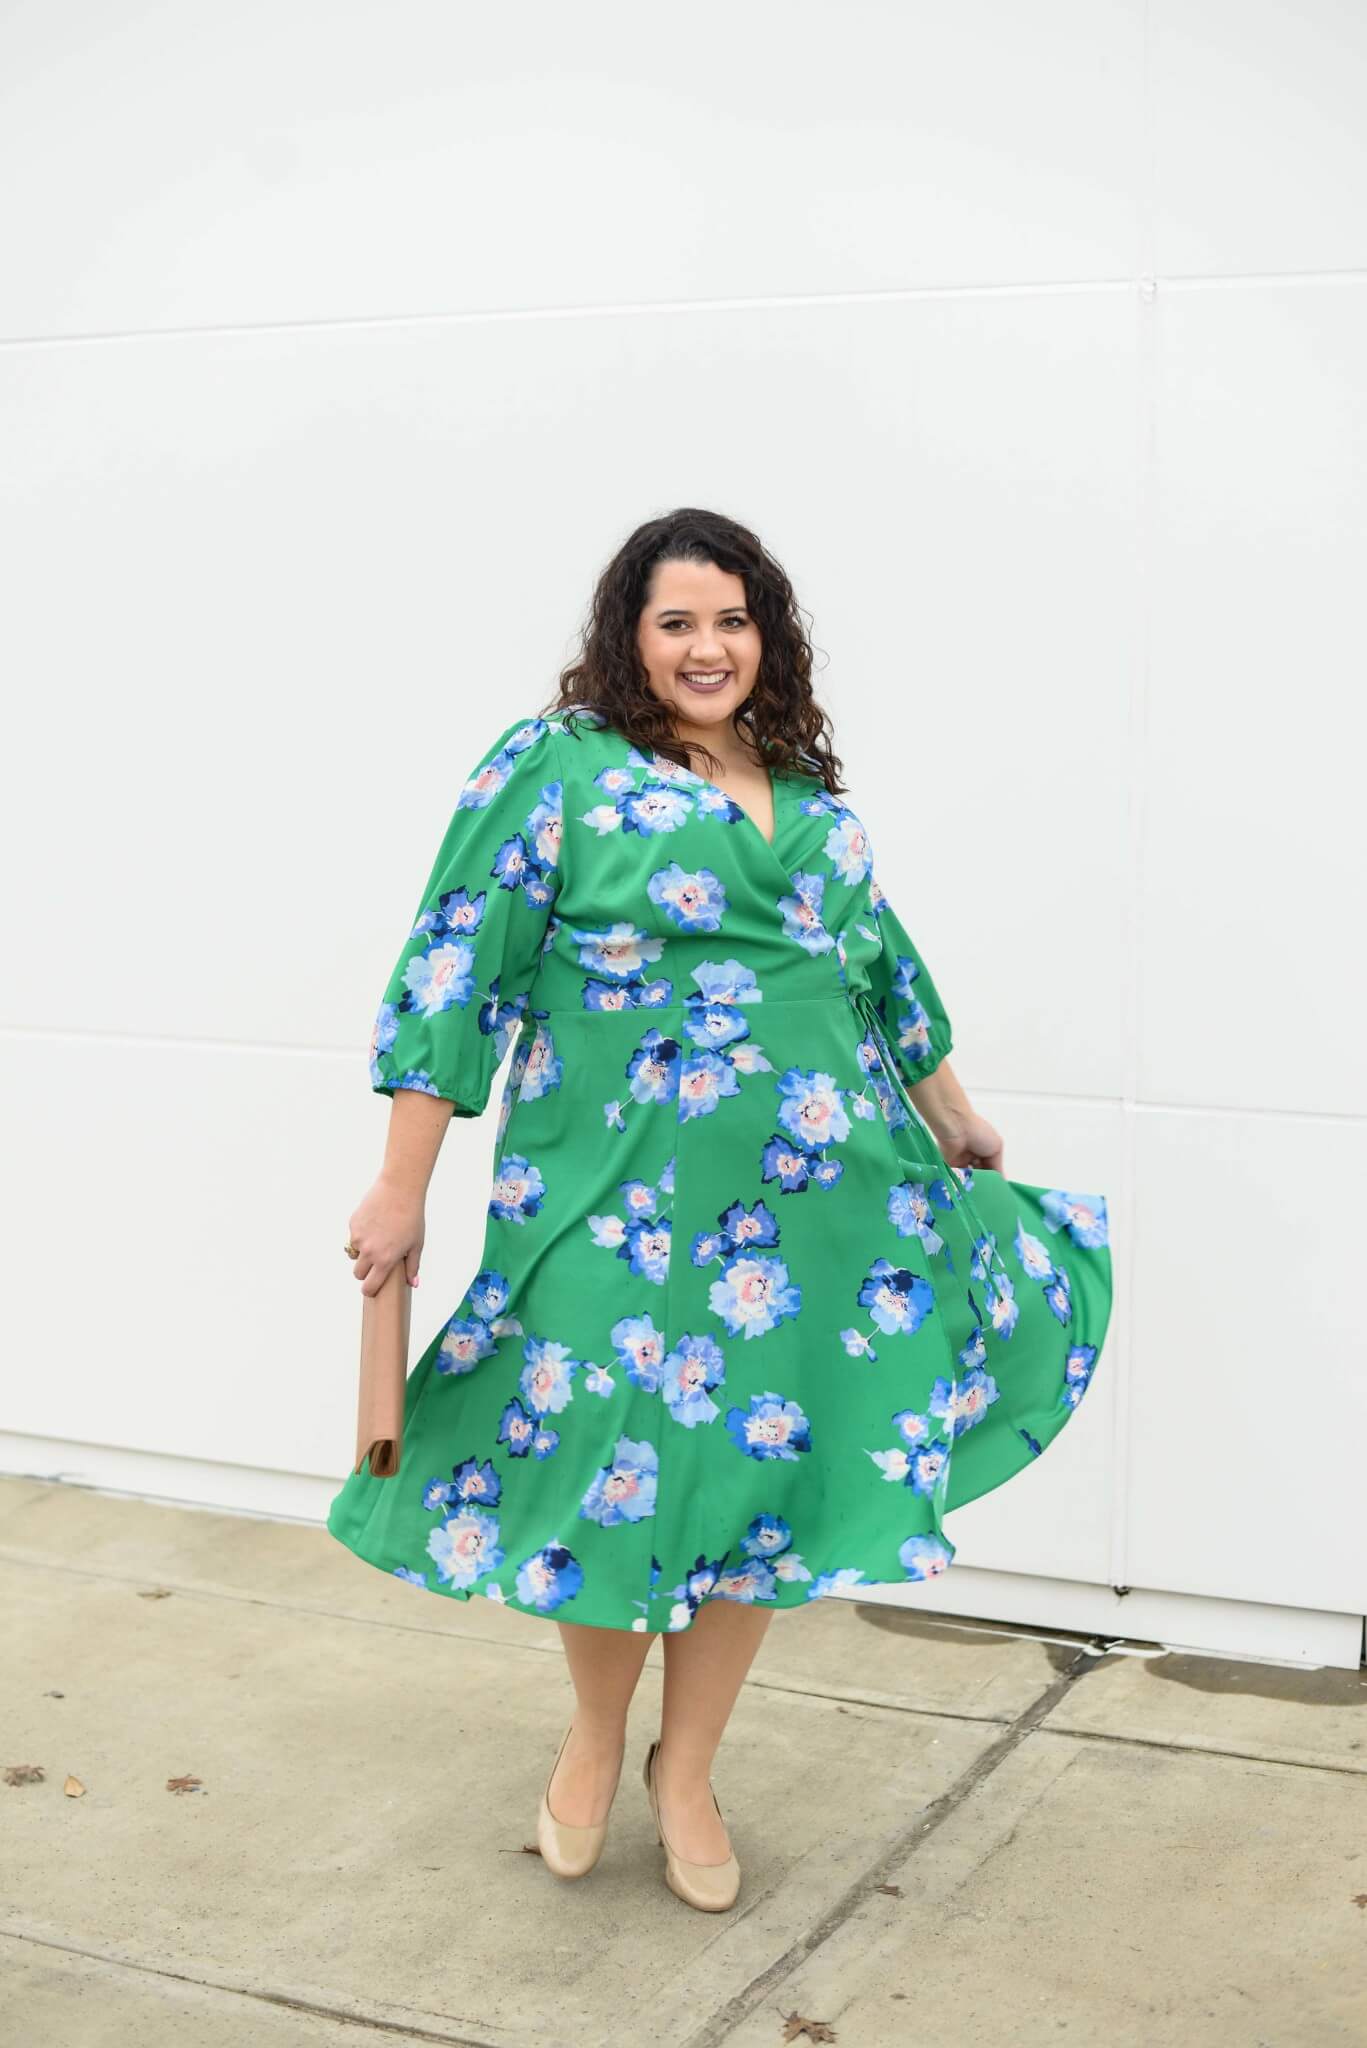 Easter weekend is just around the corner and this green floral plus size faux wrap dress is perfect for Easter Sunday brunch.